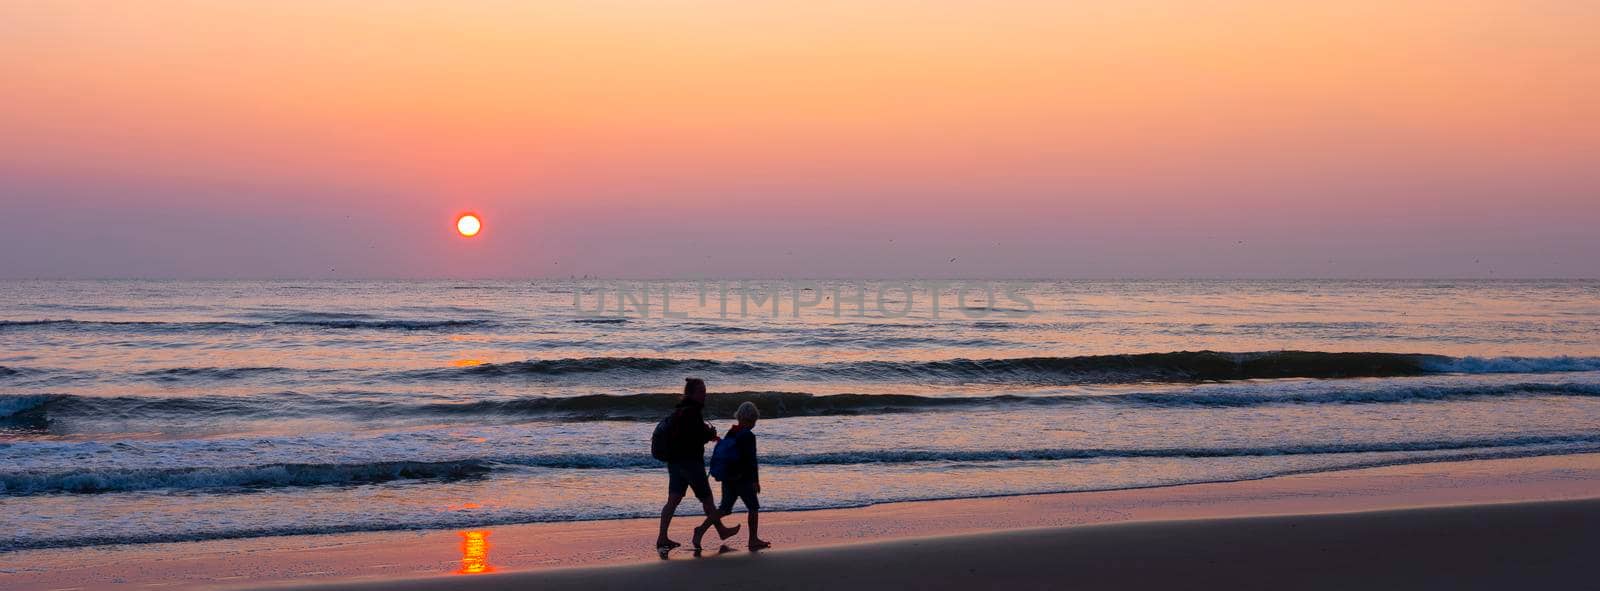 mother and child walk on beach during colorful sunset over north sea by ahavelaar